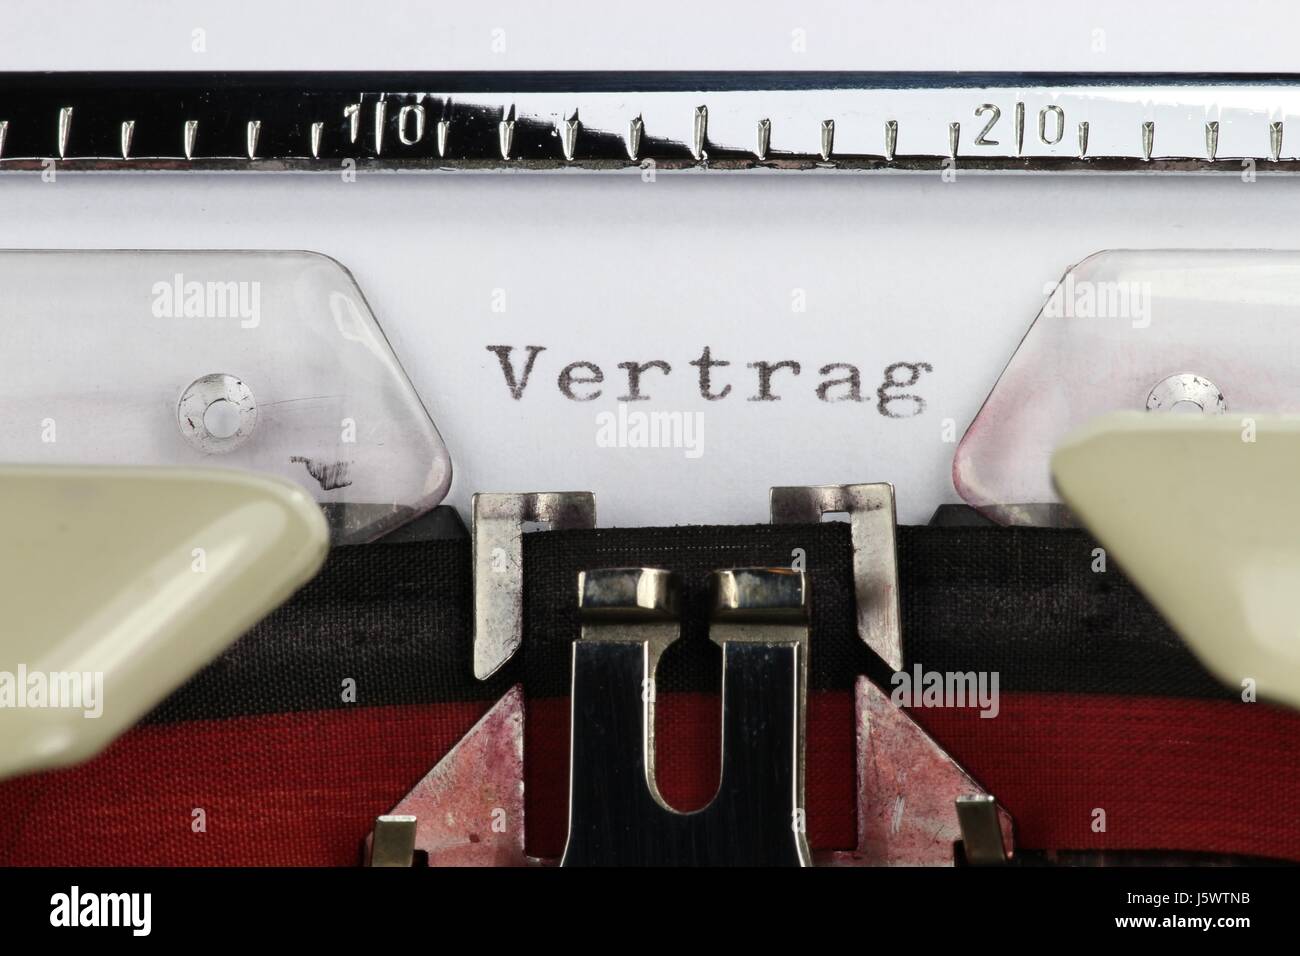 Vertrag (German word for contract) written with old typewriter Stock Photo